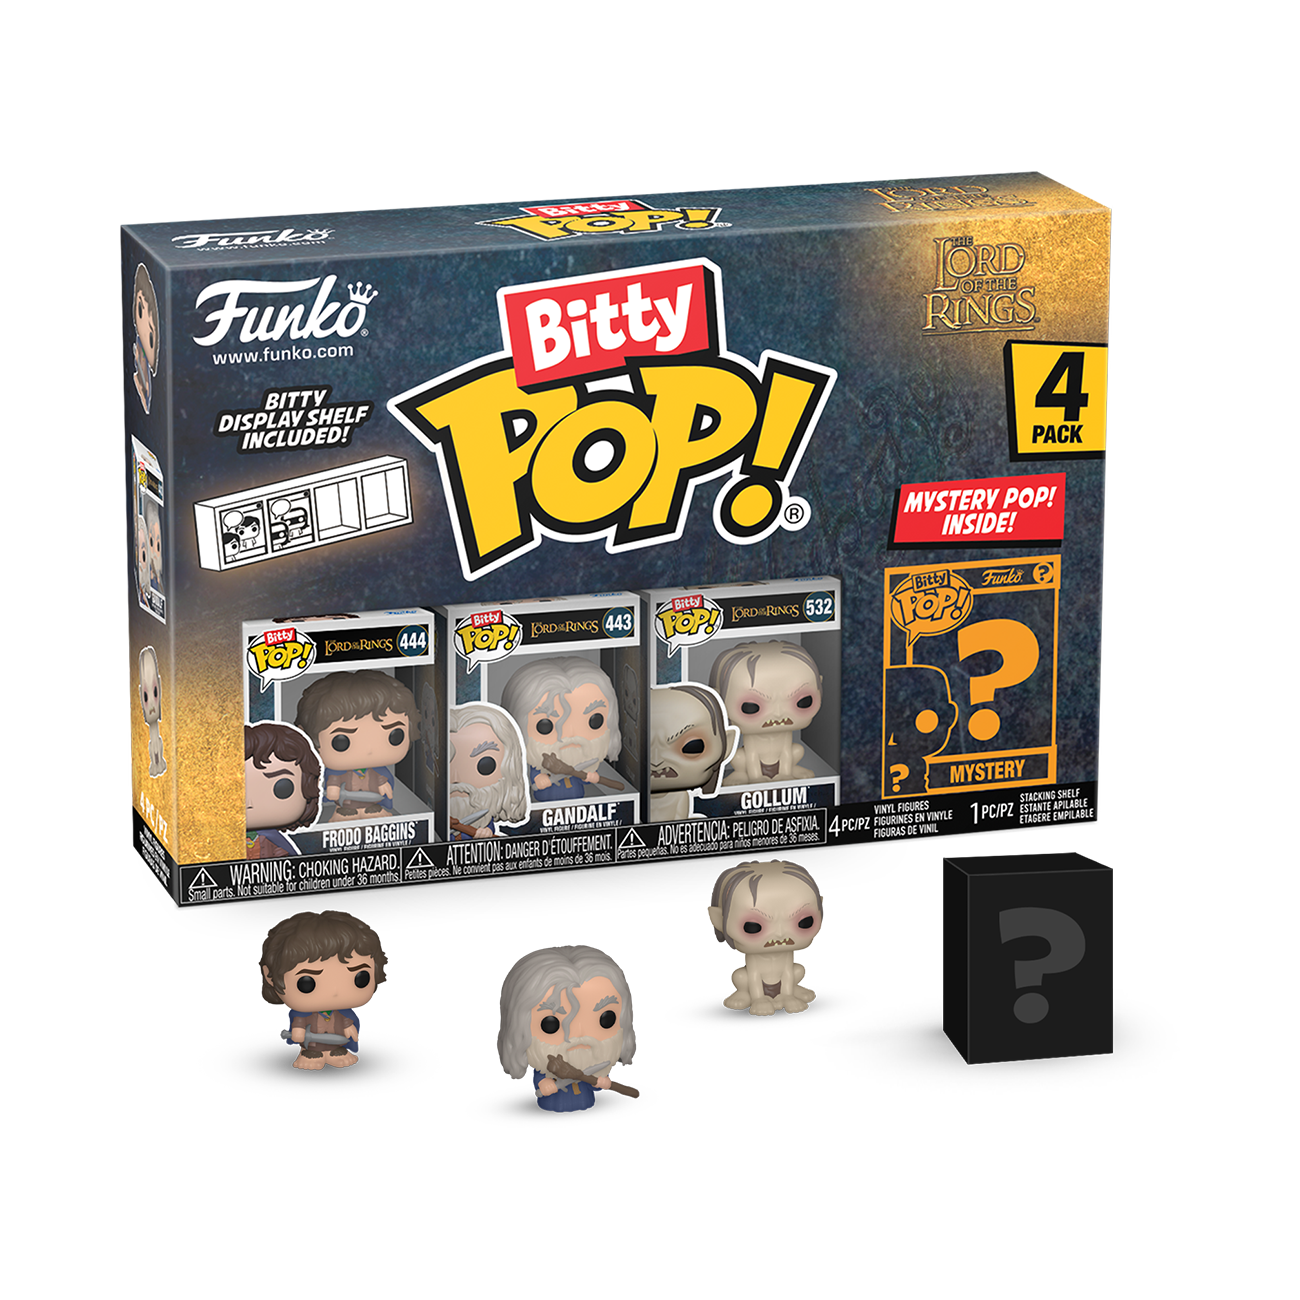 Funko BITTY POP! The Lord Of The Rings 4-Pack Series 1